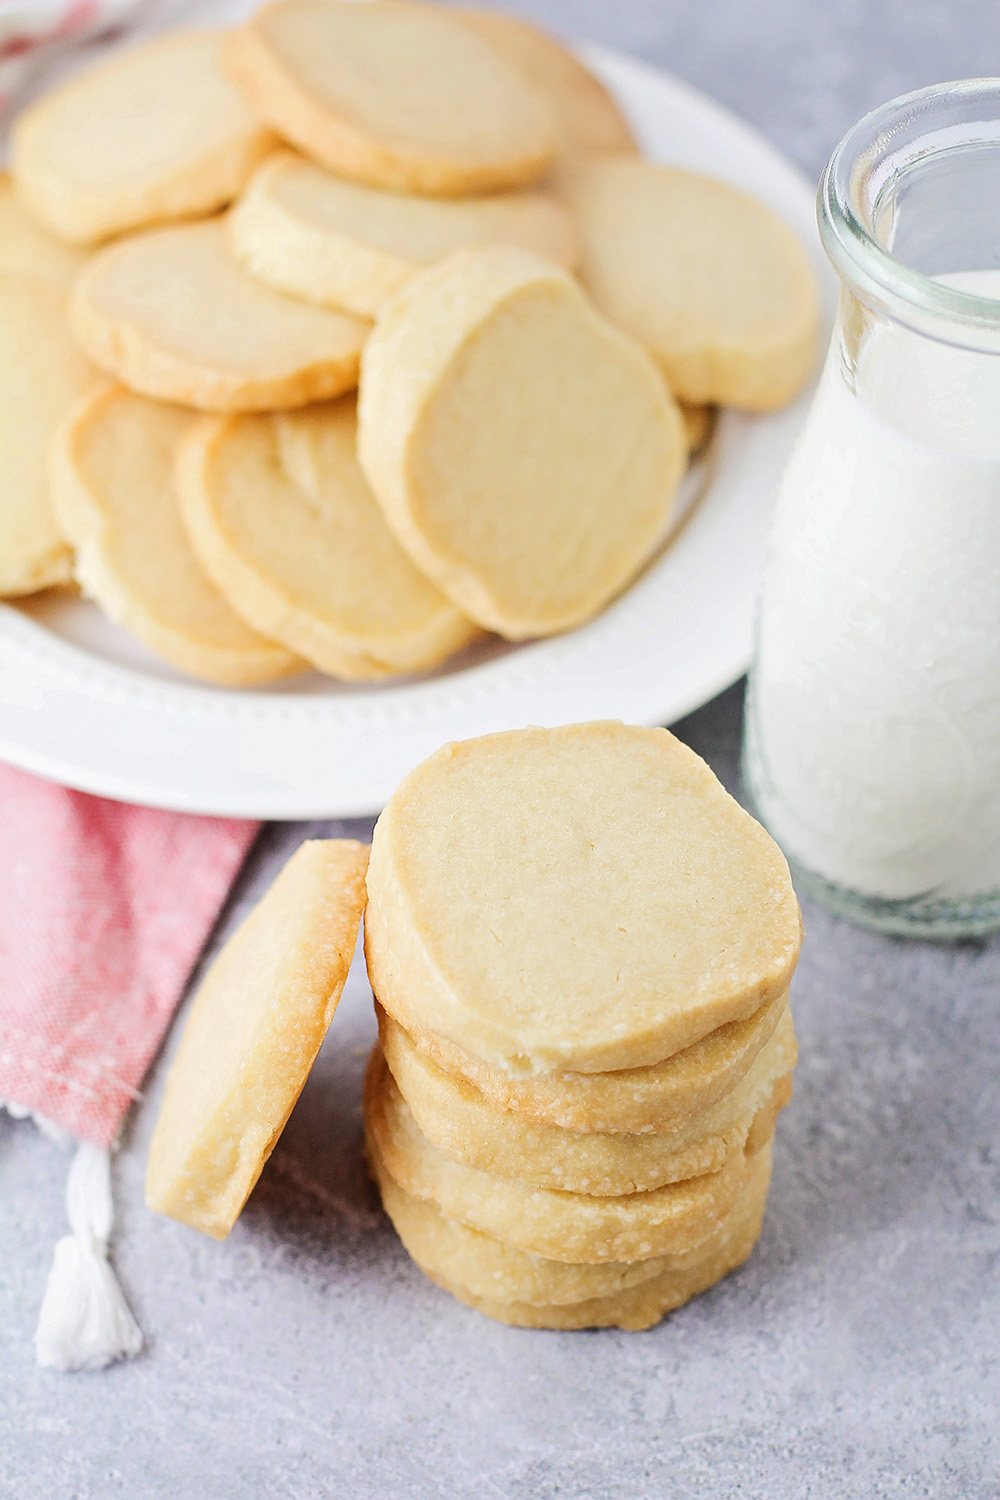 These crisp and buttery simple shortbread cookies are incredibly delicious, and so easy to make!